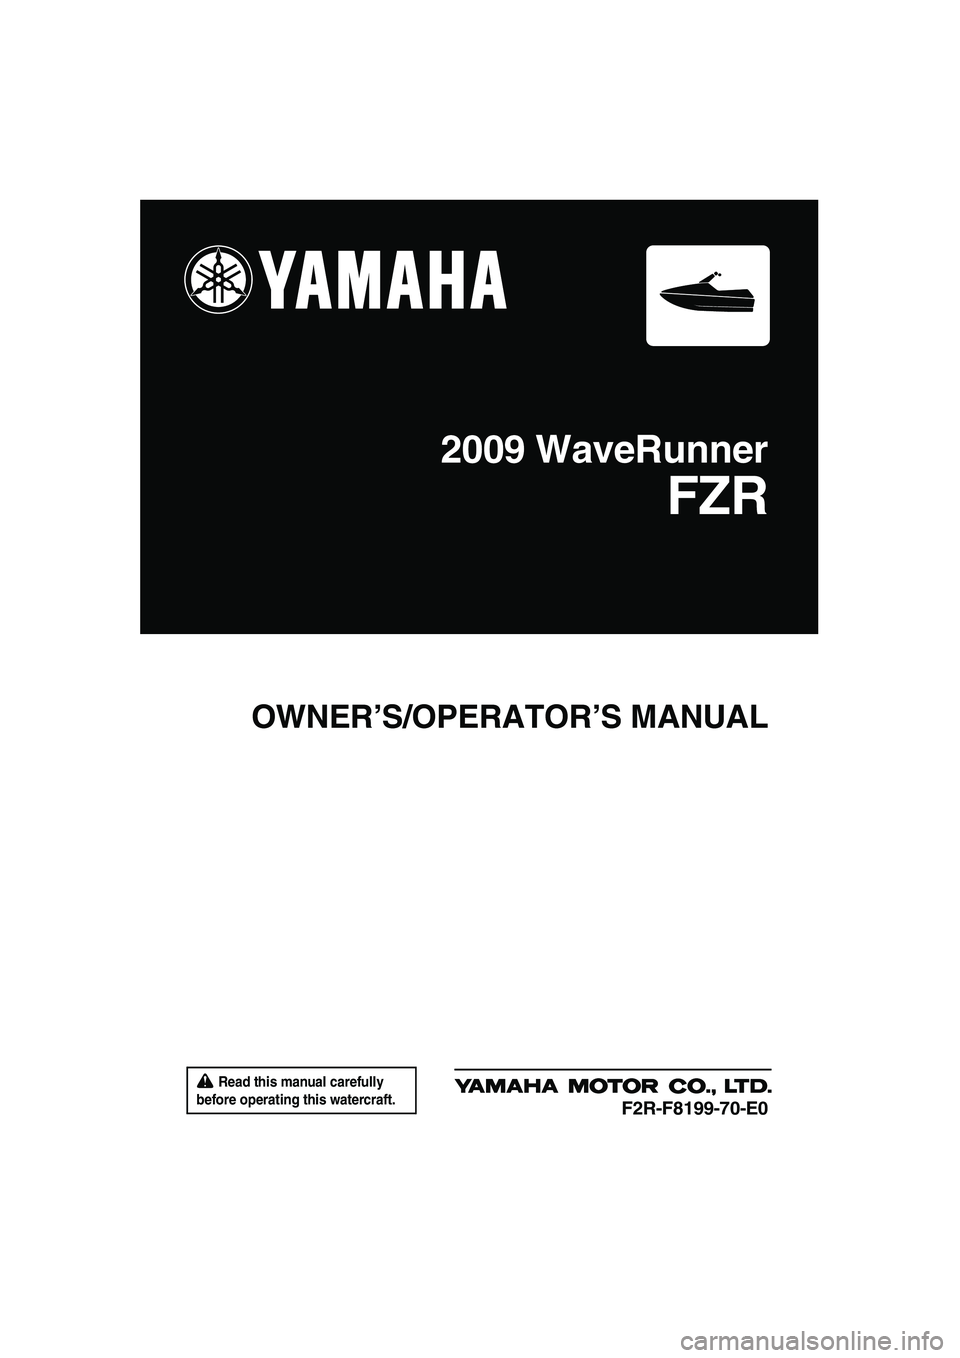 YAMAHA FZR SVHO 2009  Owners Manual  Read this manual carefully 
before operating this watercraft.
OWNER’S/OPERATOR’S MANUAL
2009 WaveRunner
FZR
F2R-F8199-70-E0
UF2R70E0.book  Page 1  Thursday, November 6, 2008  10:05 AM 